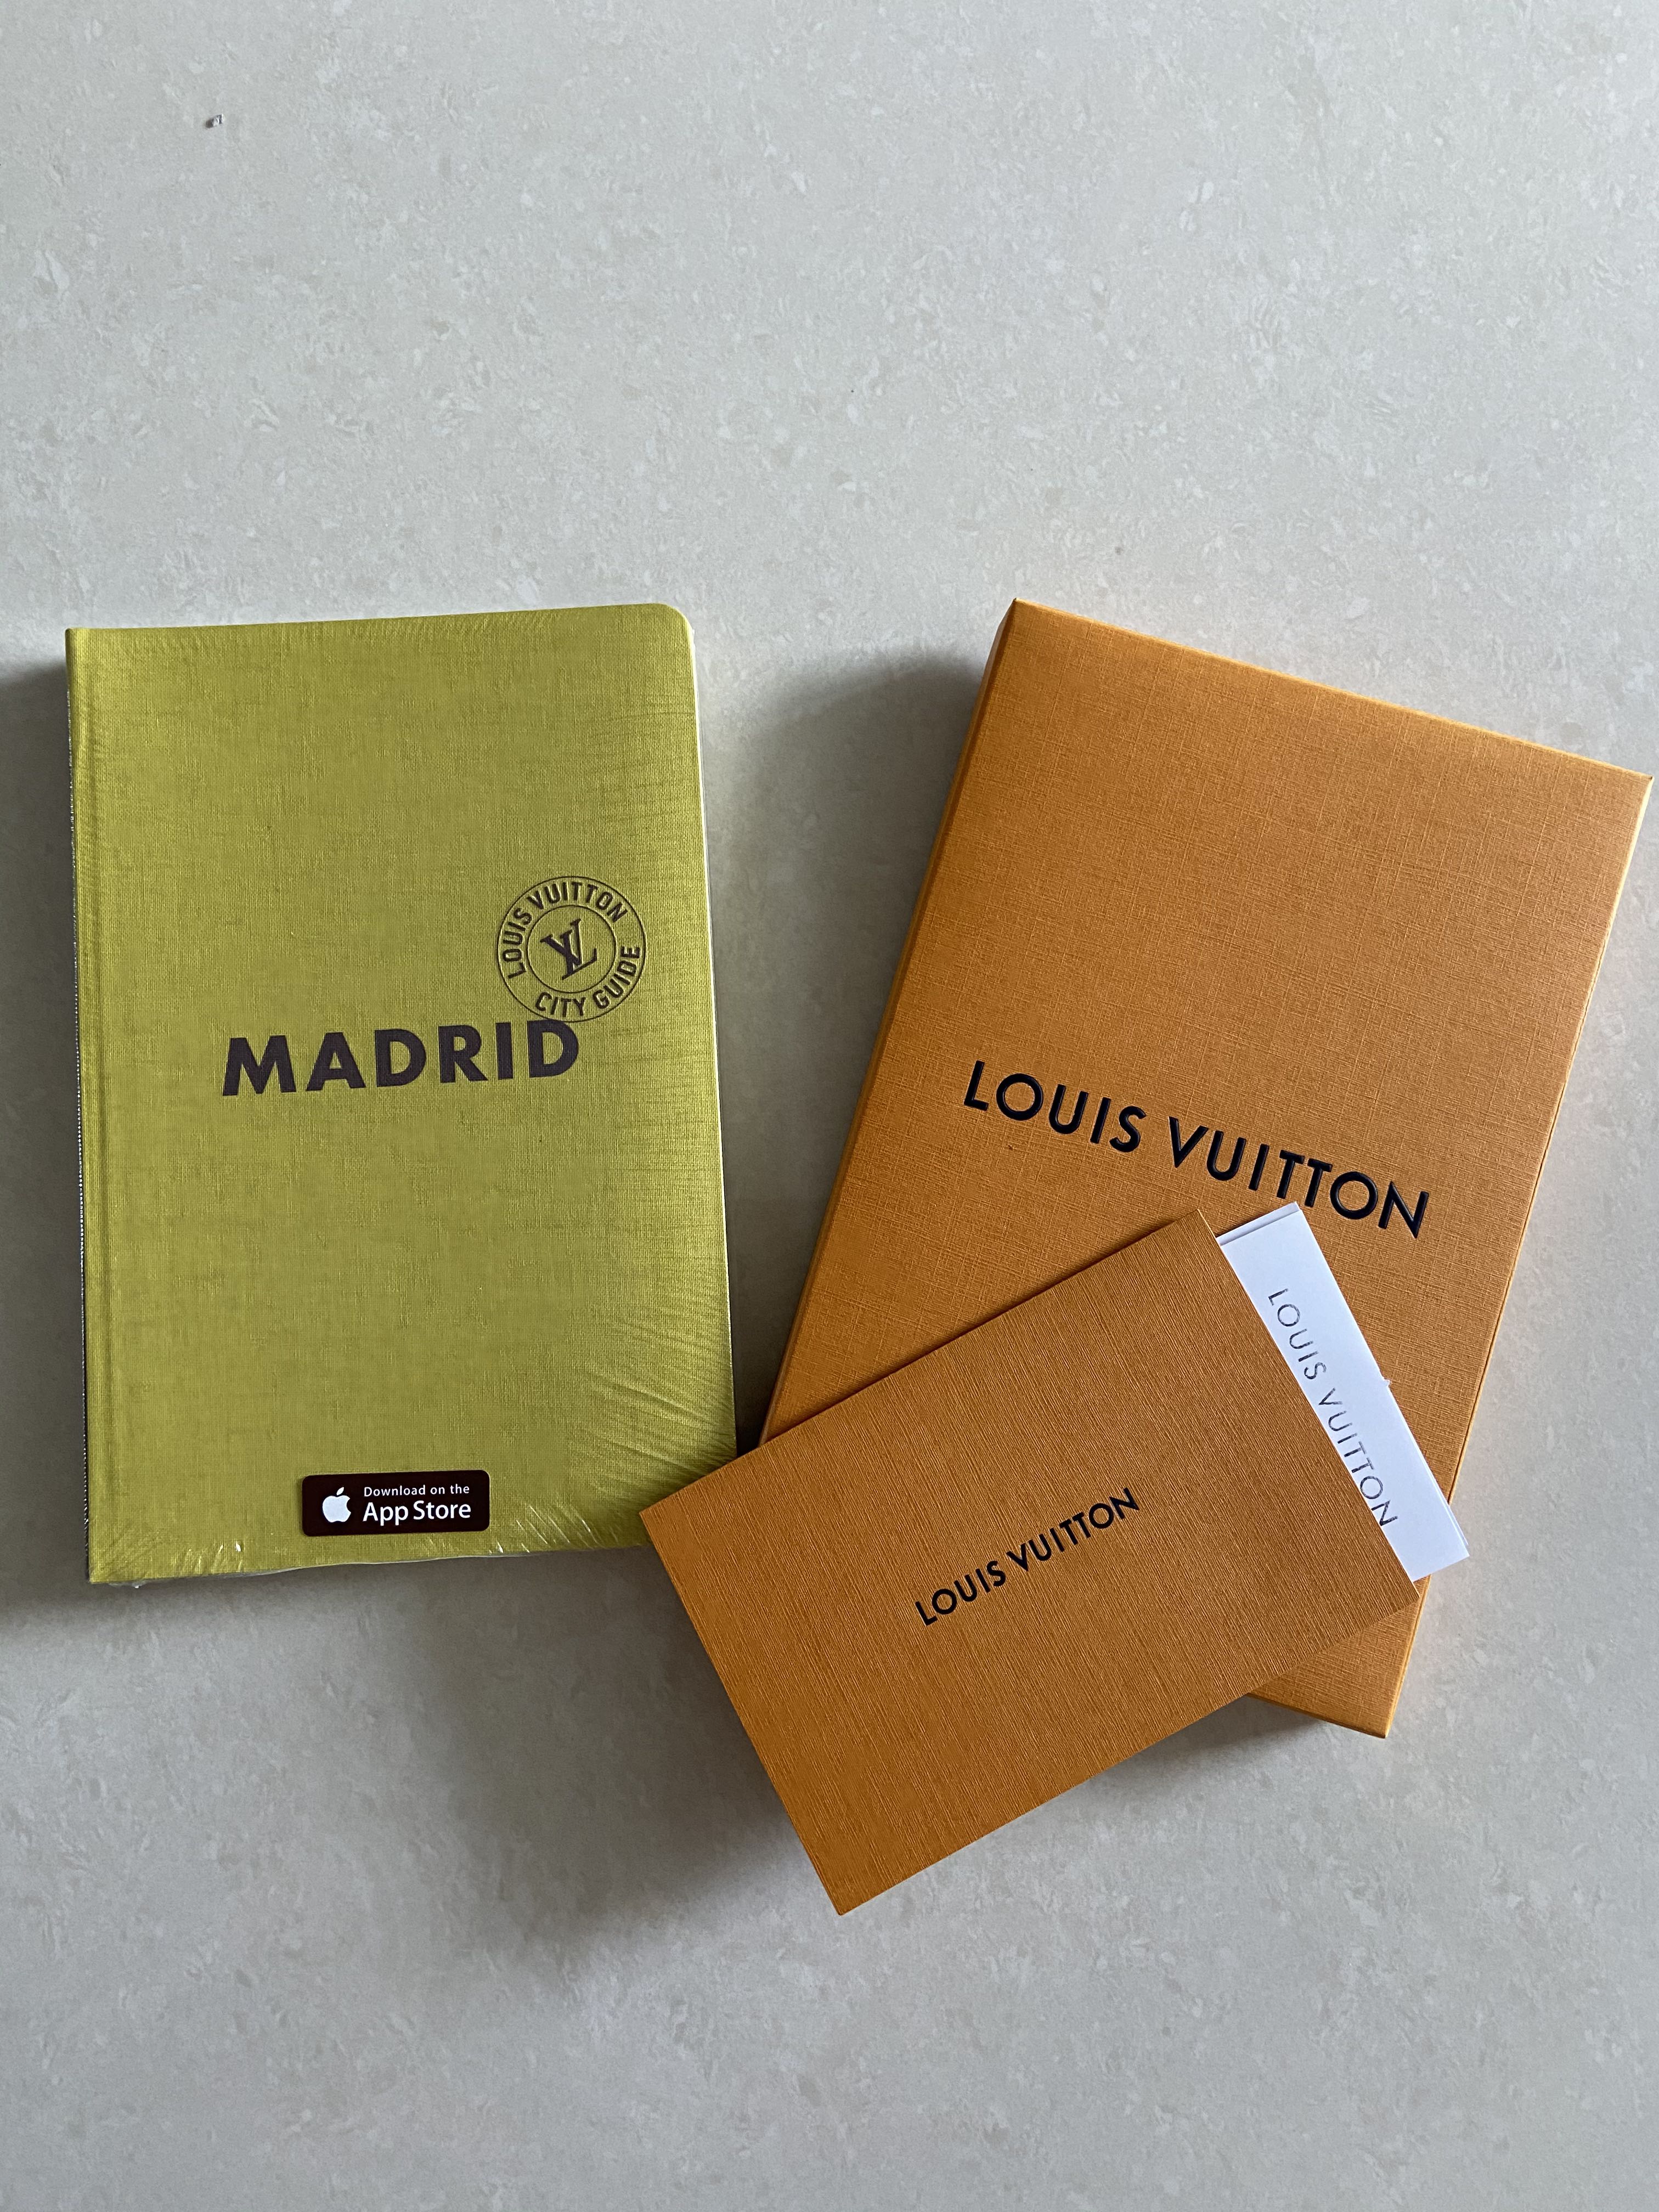 LOUIS VUITTON City Guide: The new Madrid destination and 10